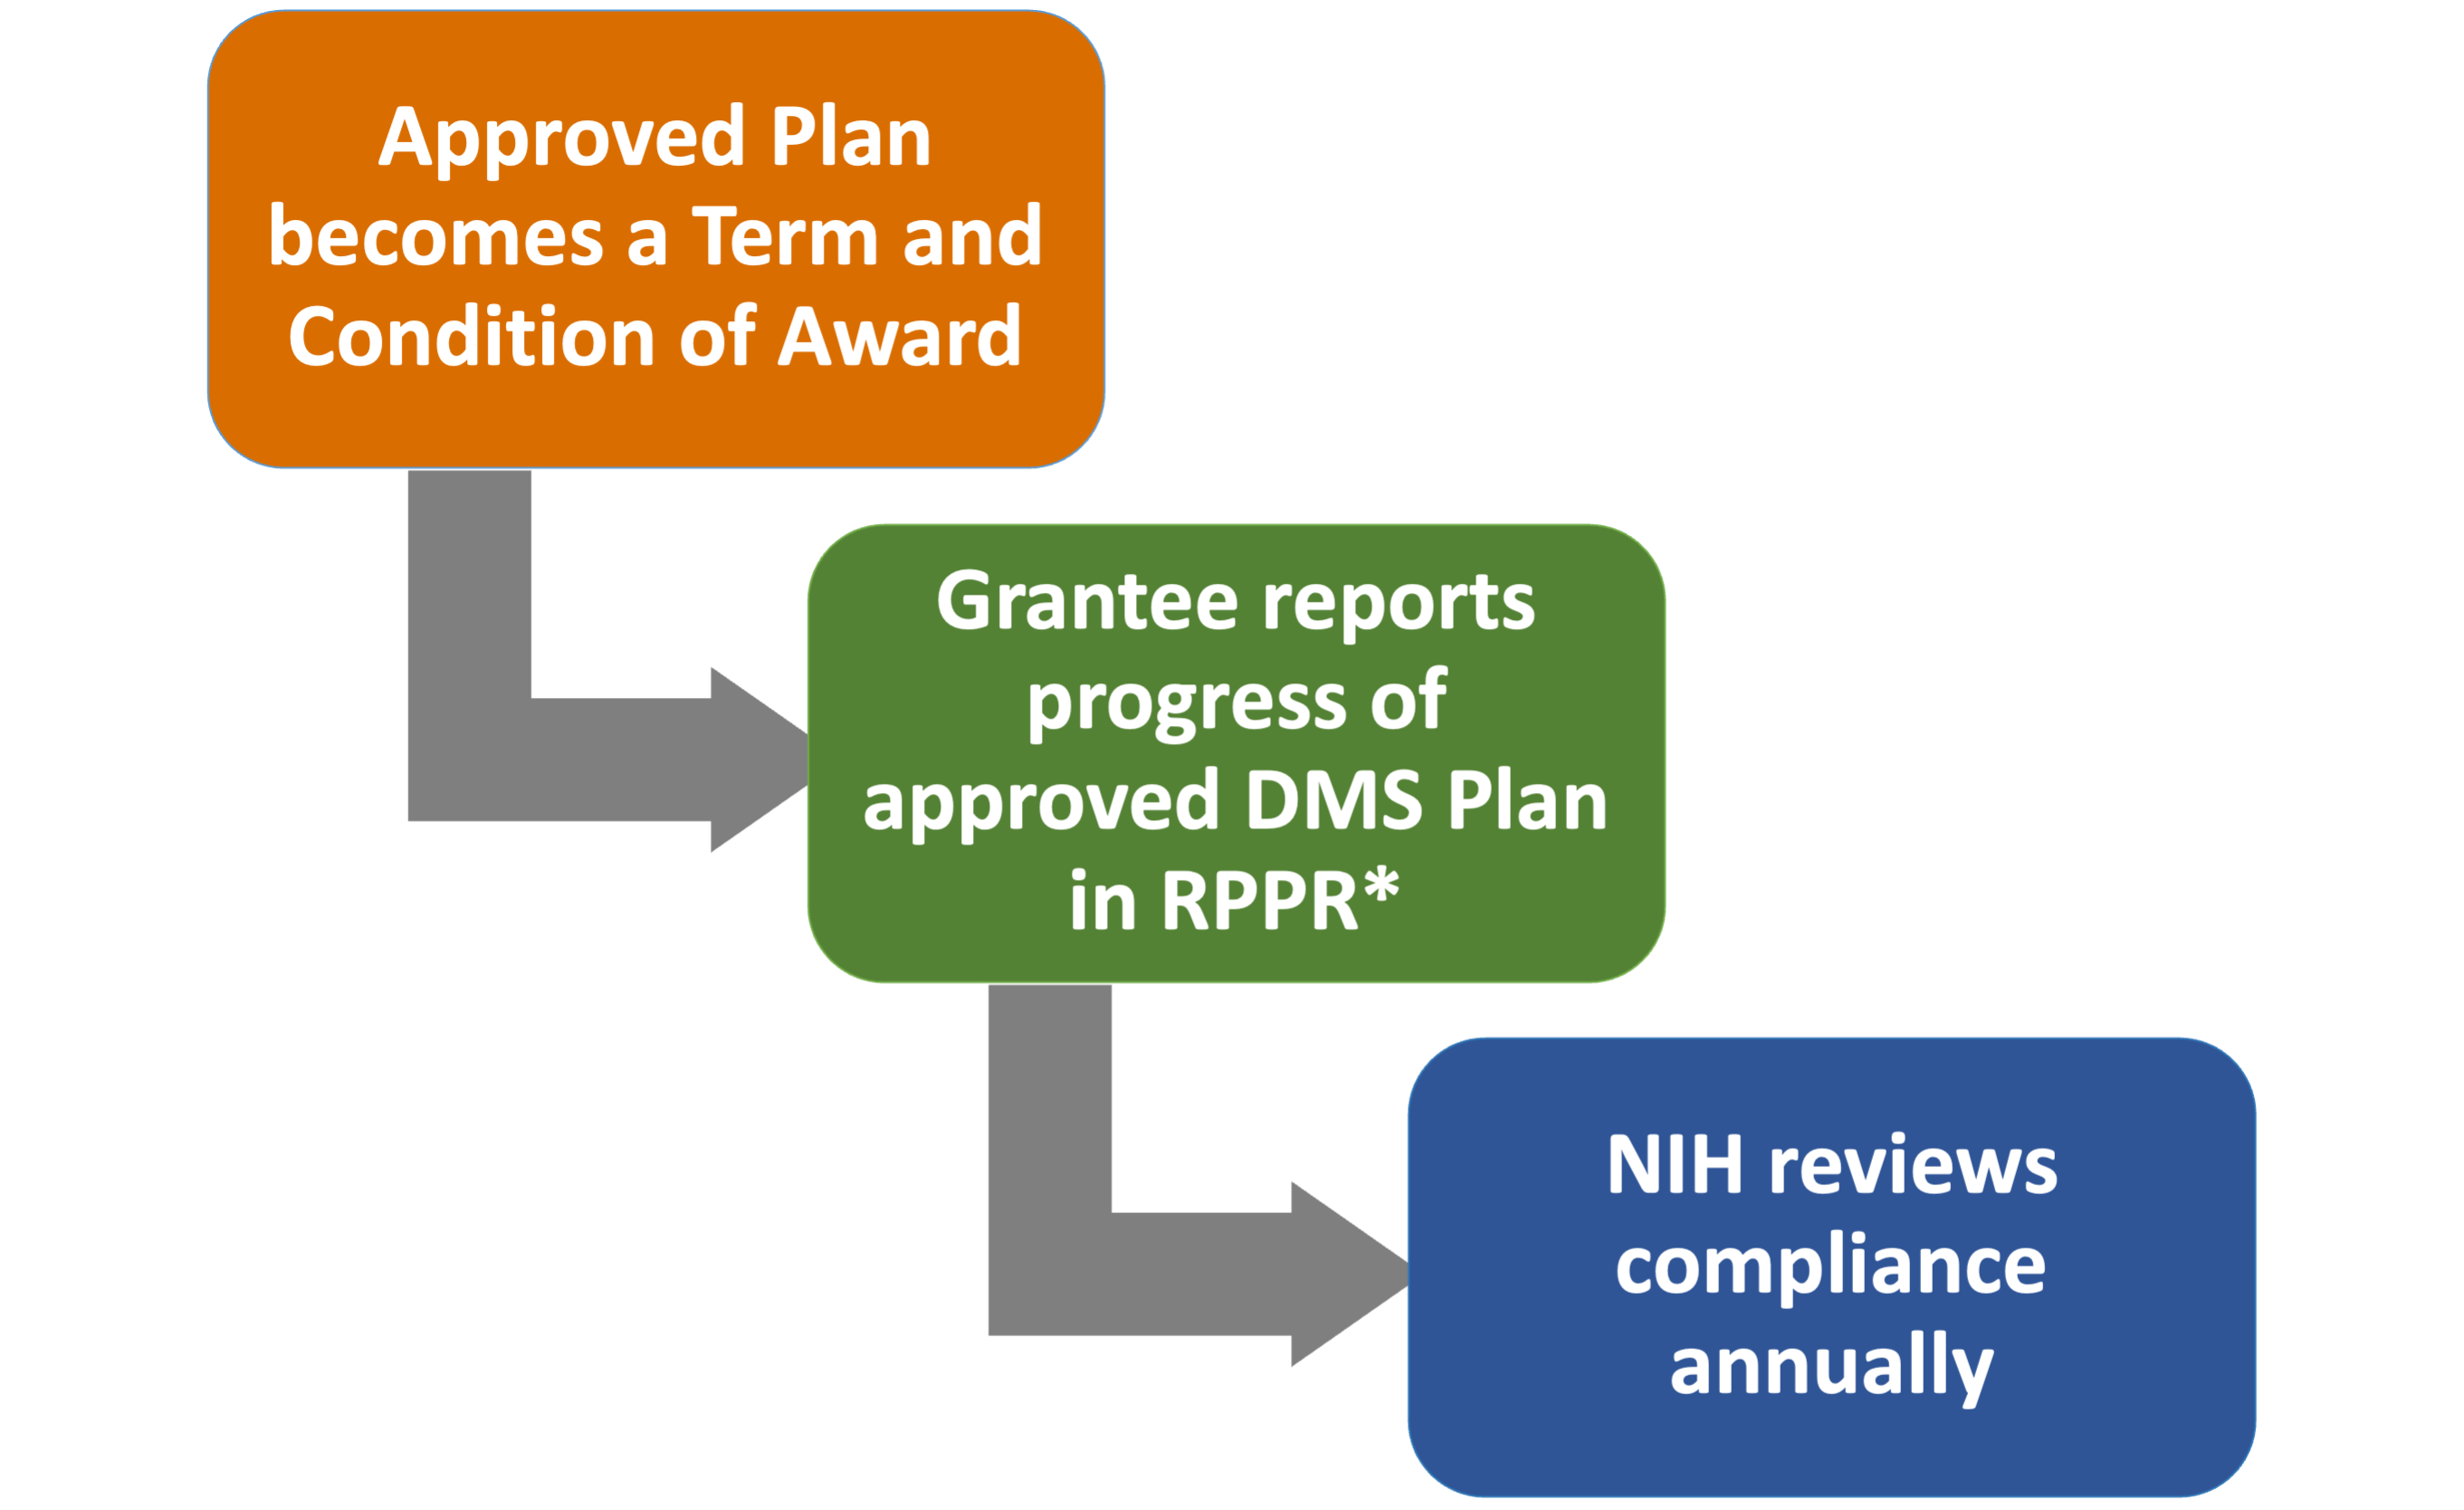 Approved Plan becomes a Term and Condition of Award; Grantee reports progress in Research Performance Progress Report; NIH reviews compliance annually